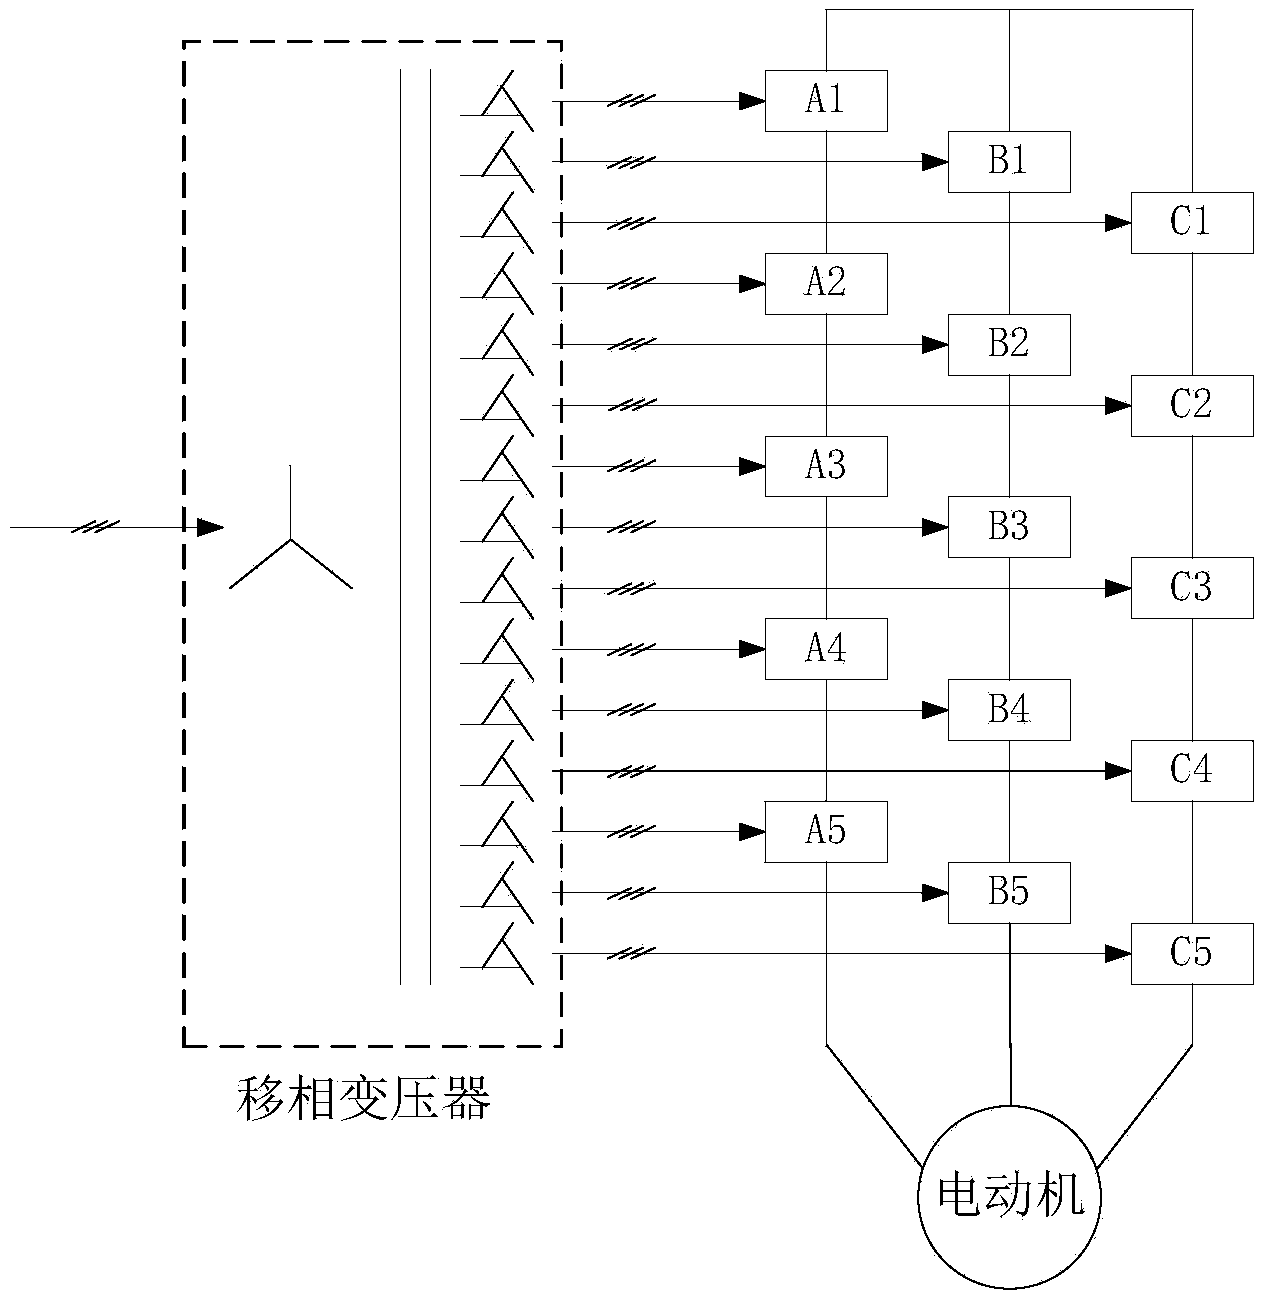 Two-motor driving type cascading multi-level inverter system without active front end and control method thereof